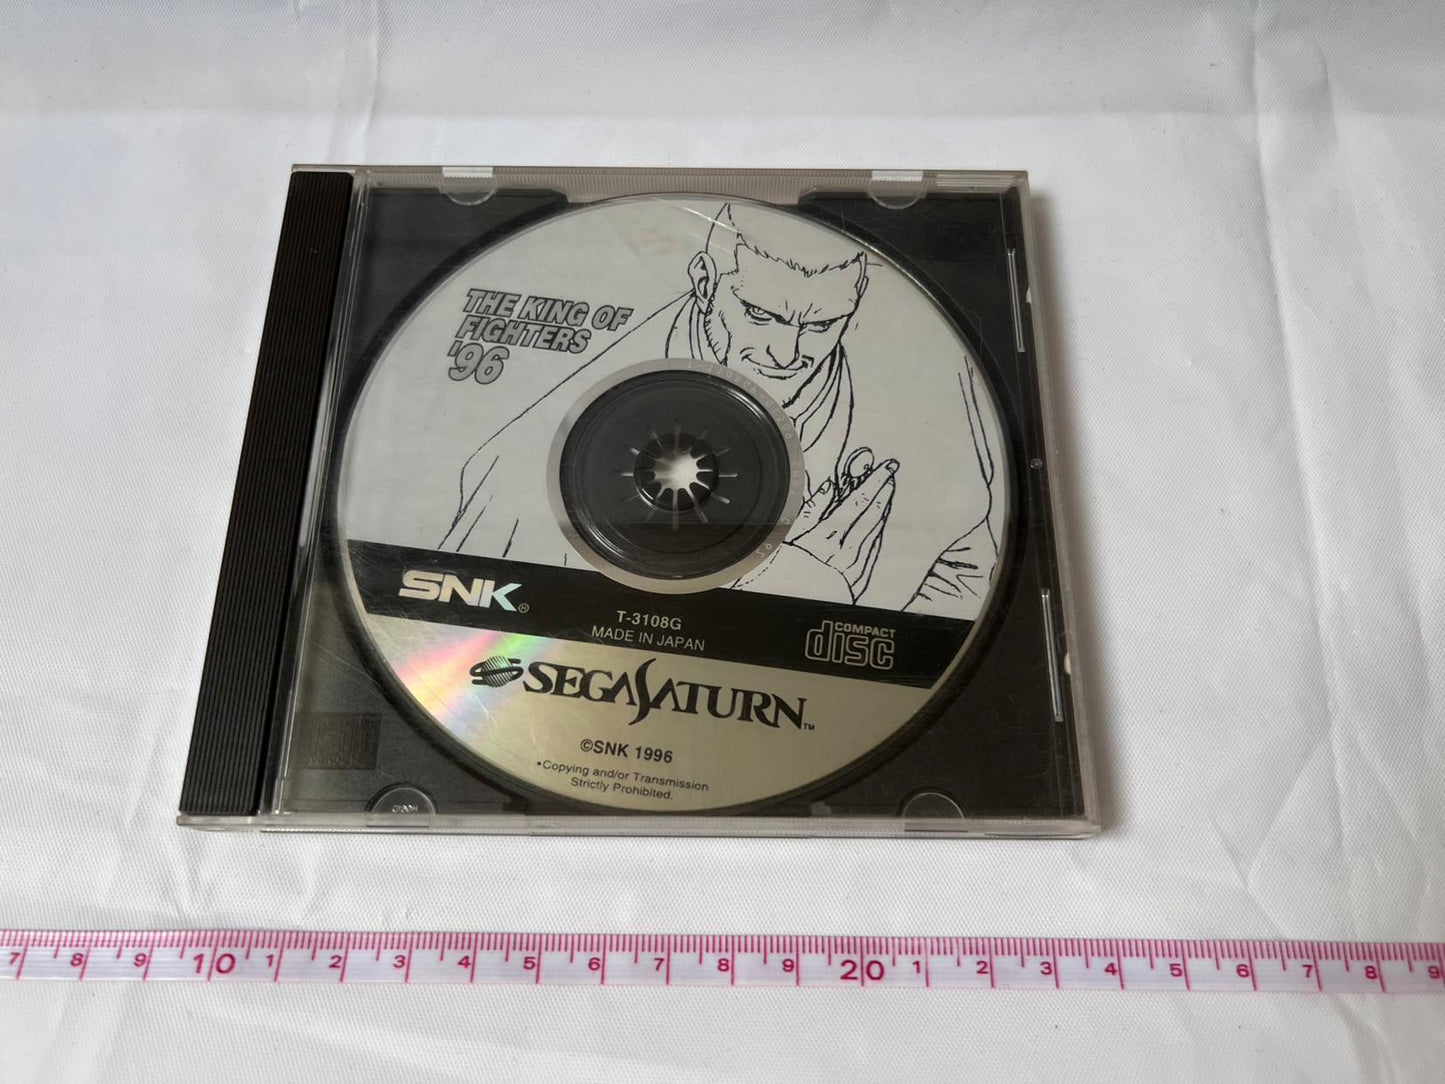 Whole sale The King Of Fighters 95, 96, 97 SEGA Saturn Games set-f1006-